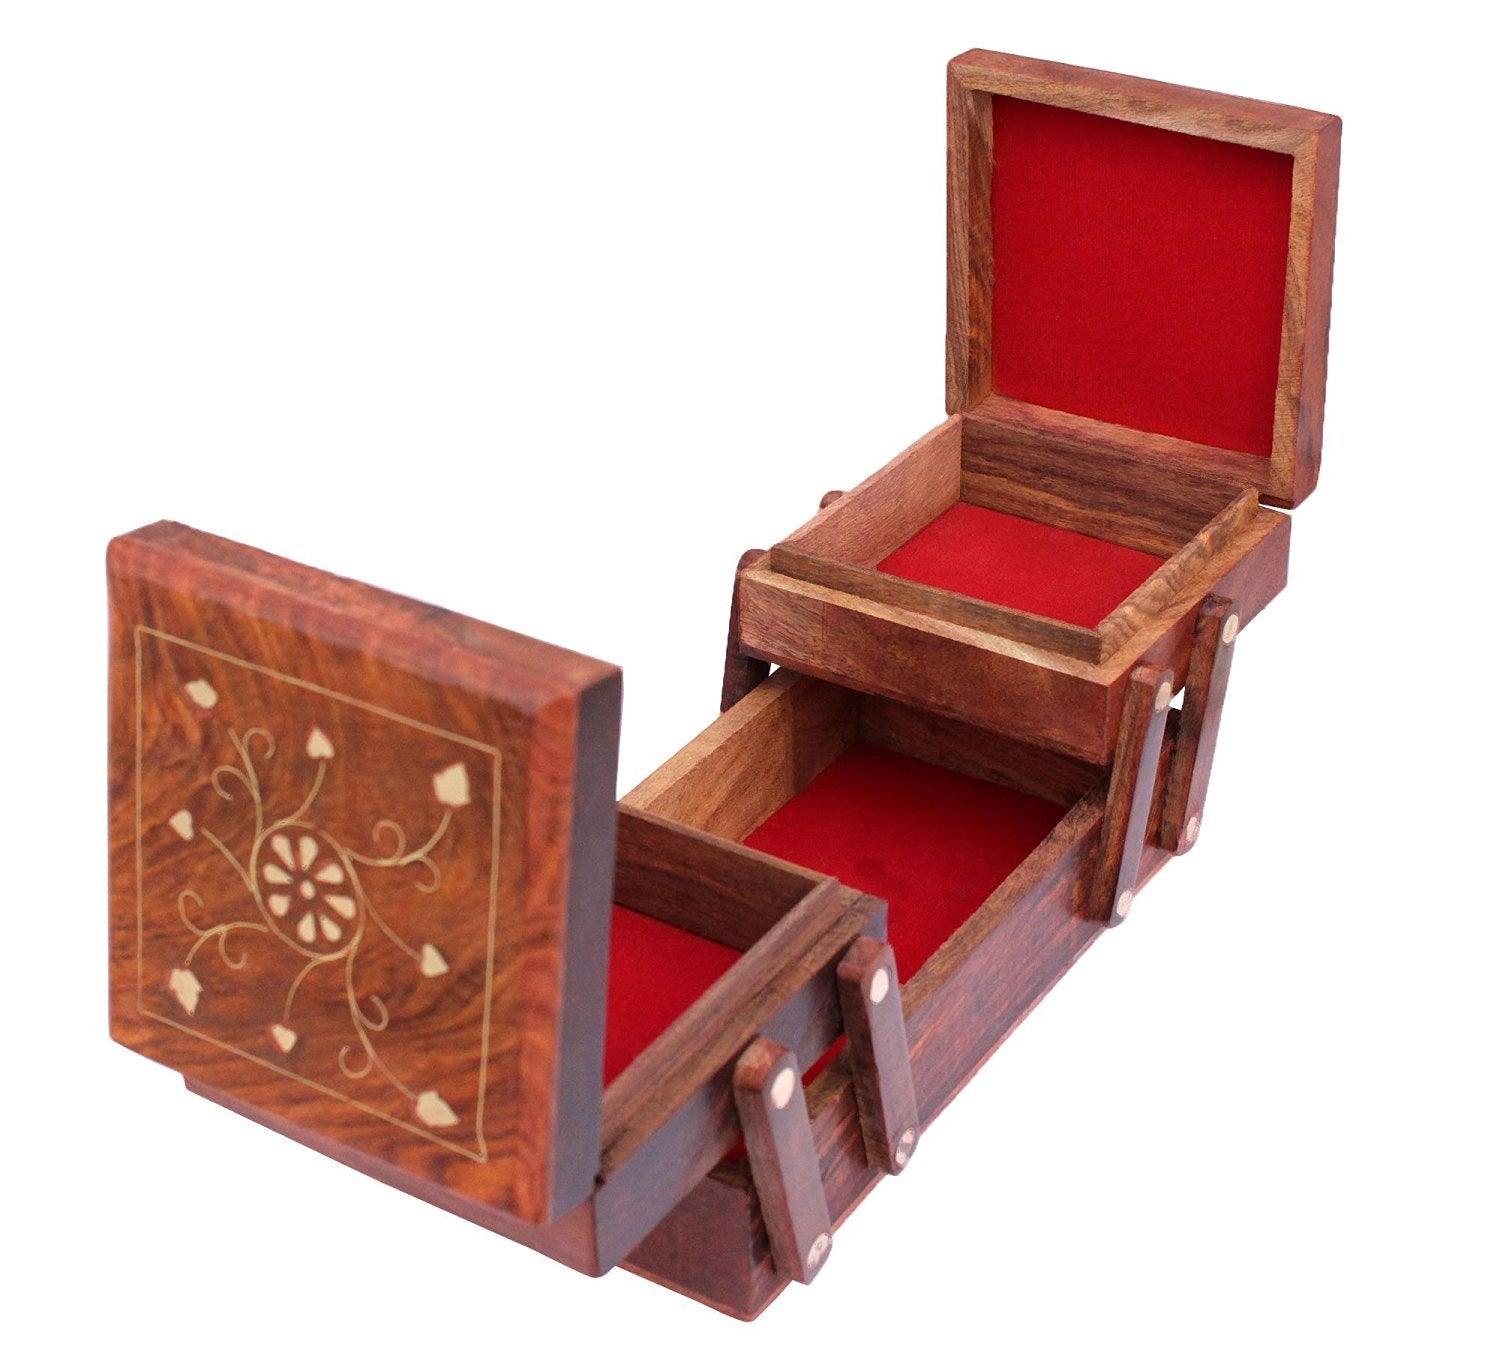 Jewellery Box for Women Wooden Flip Flap Handmade Gift, 8 Inches - GreentouchCrafts